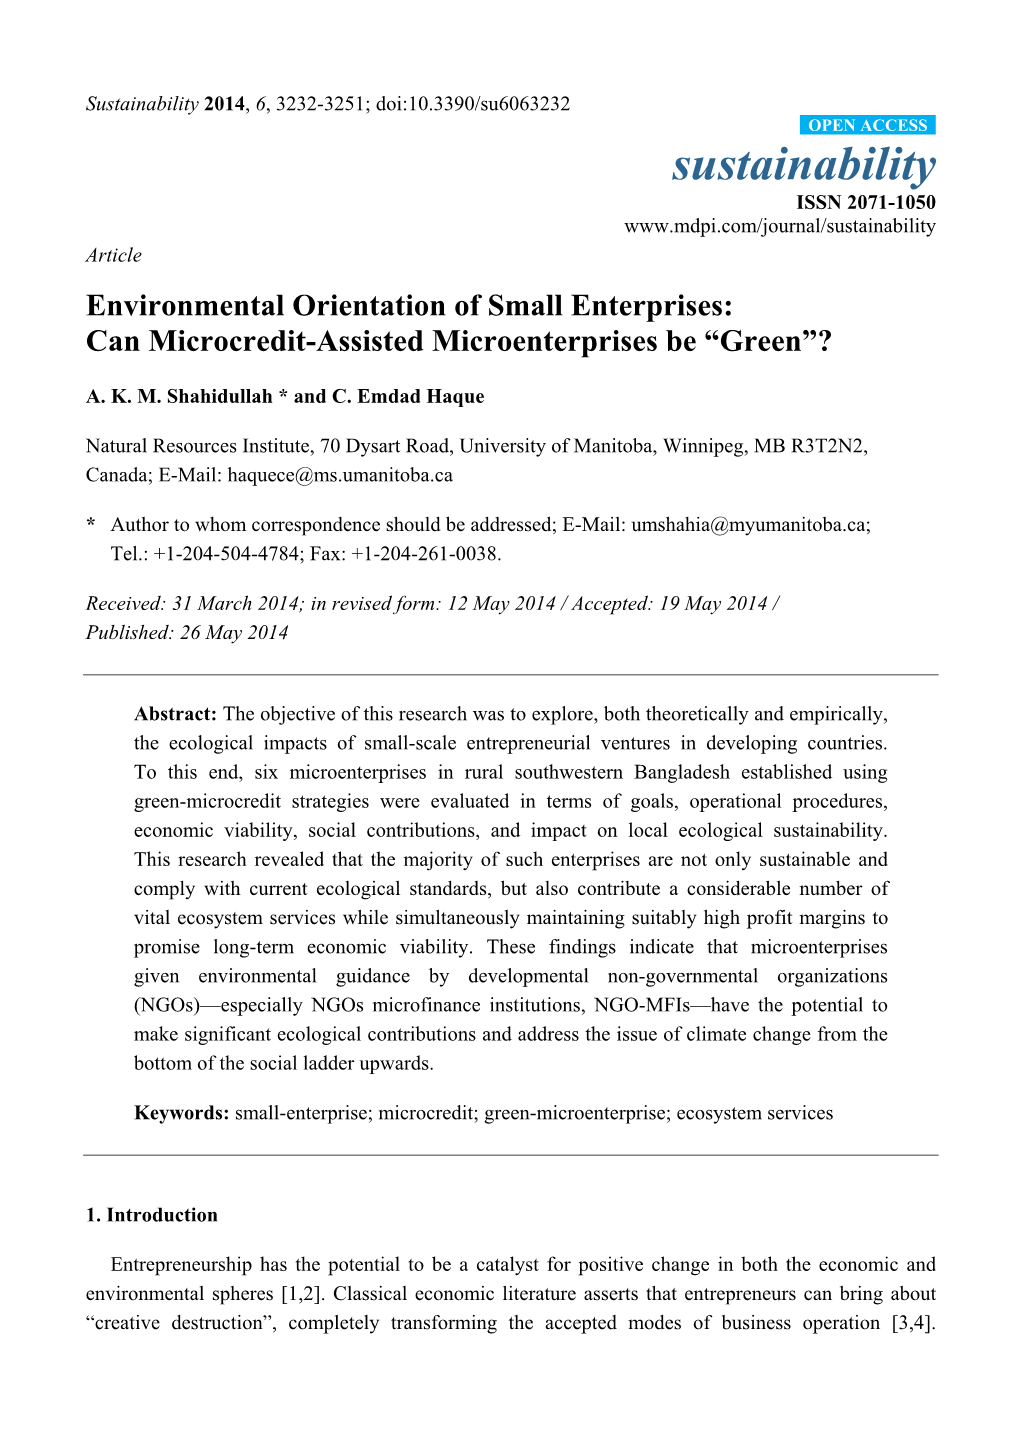 Environmental Orientation of Small Enterprises: Can Microcredit-Assisted Microenterprises Be “Green”?